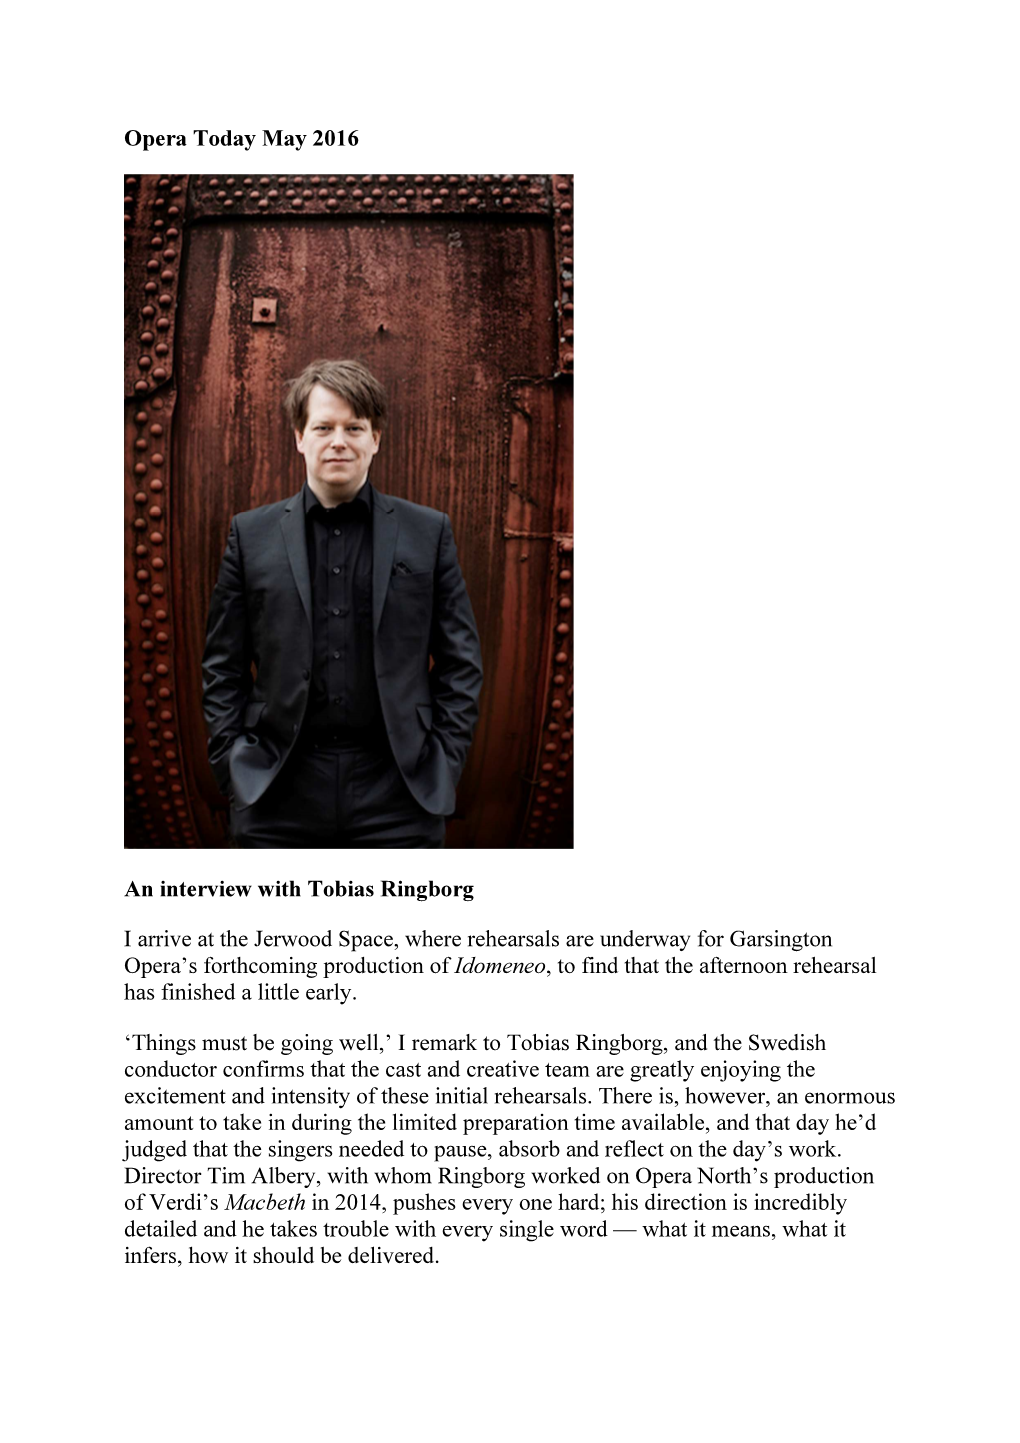 Opera Today May 2016 an Interview with Tobias